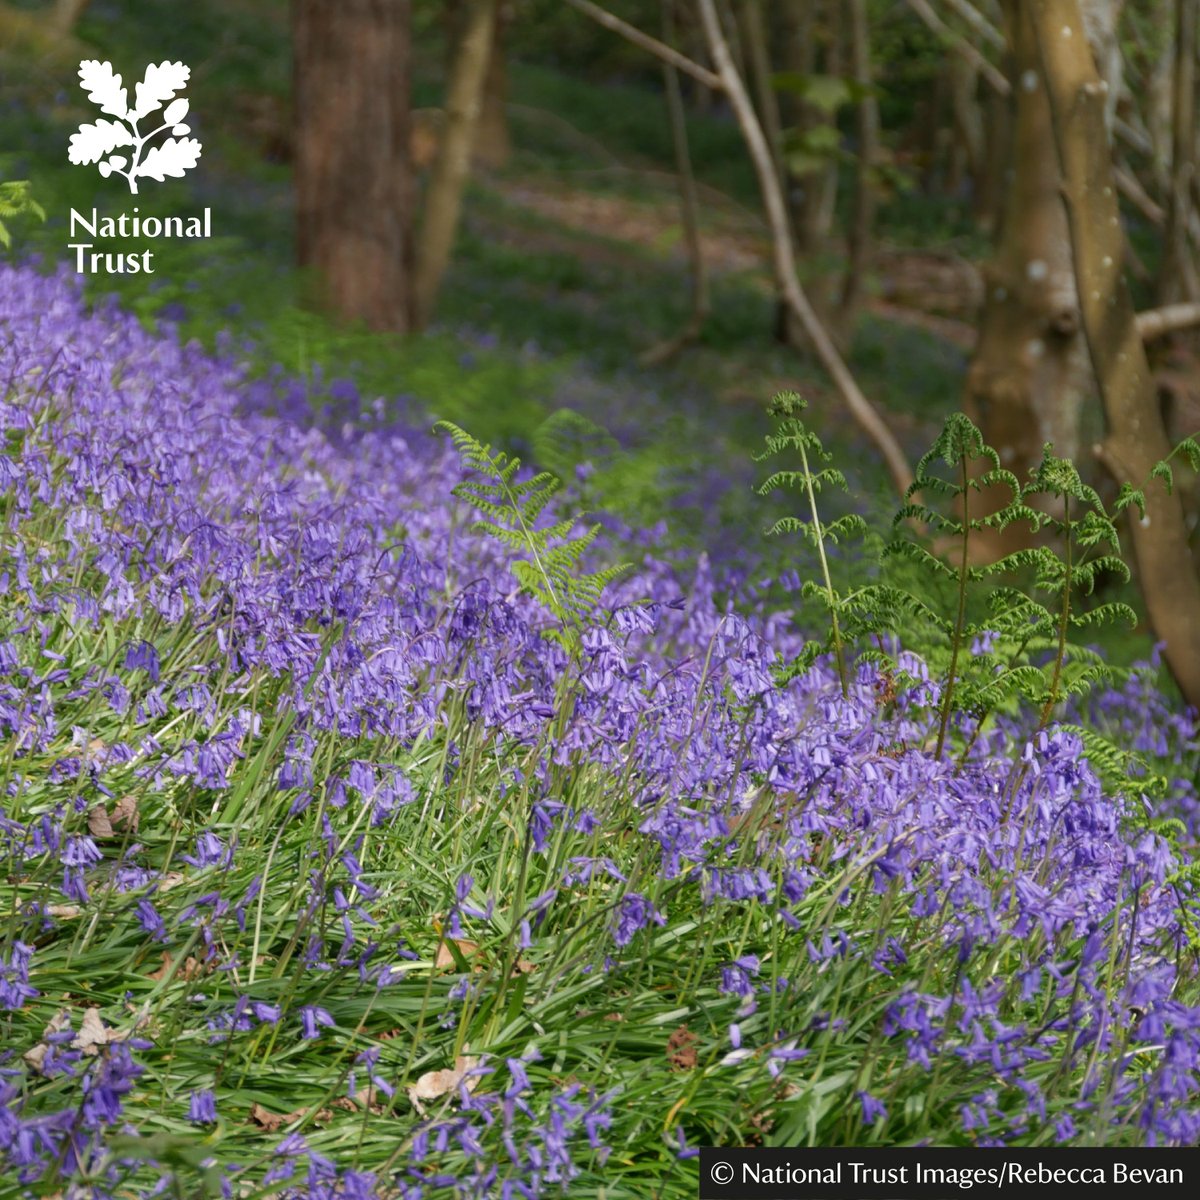 In the April sunshine, bluebells are carpeting the woods at Mottistone & Borthwood Copse, & the bracken covered slopes of Ventnor Downs. Want to help look after them? By not standing on bluebells, staying on paths & not picking them, we can all protect this springtime favourite.